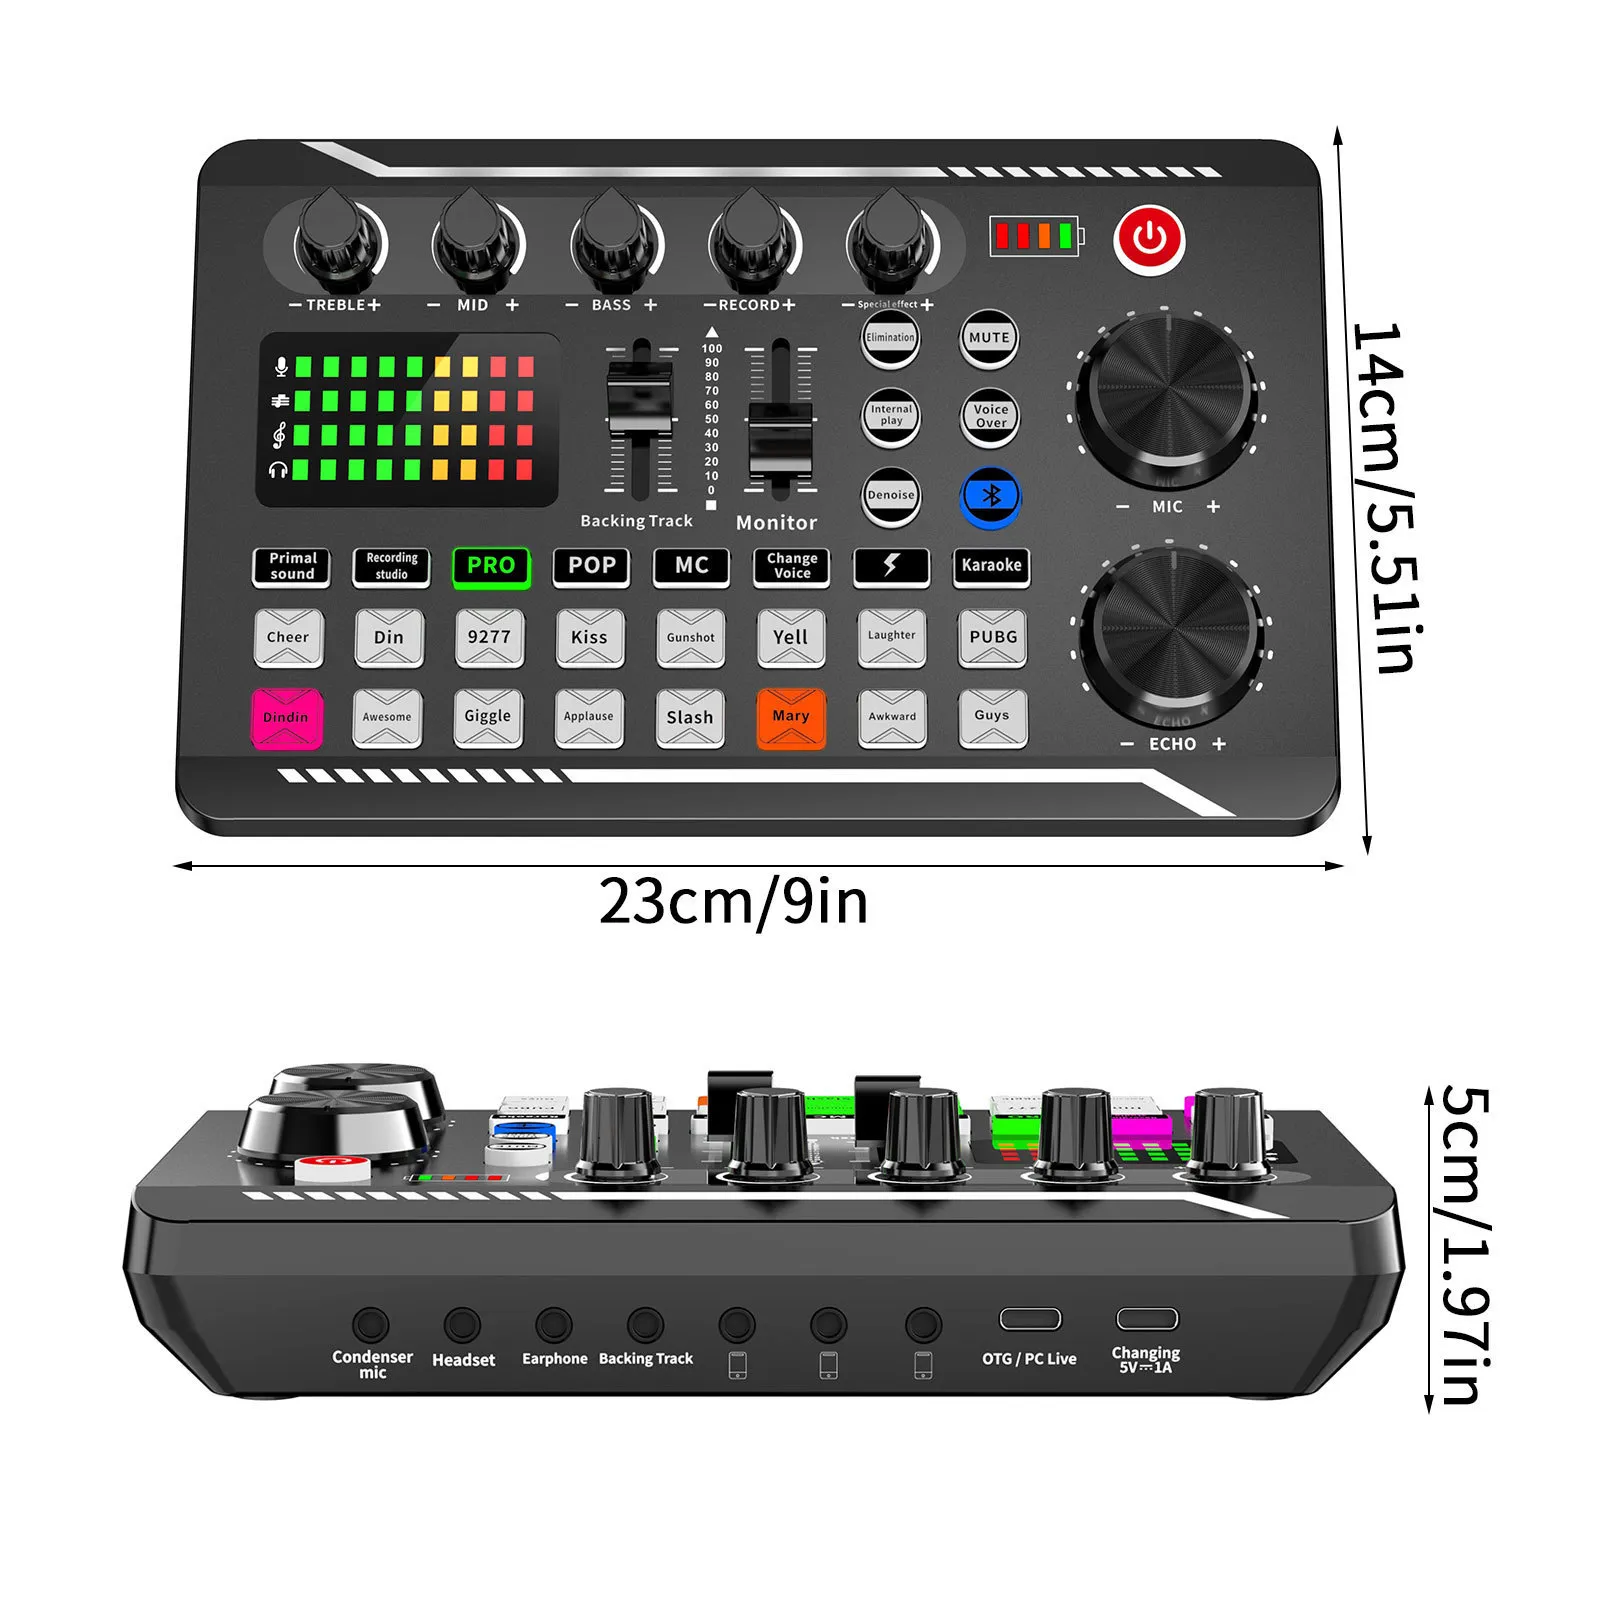 Microphones Podcast Microphone Sound Card Kit Professional Studio Condenser Mic F998 Live Sound Mixer For Livestreaming Podcasting Recording 221115